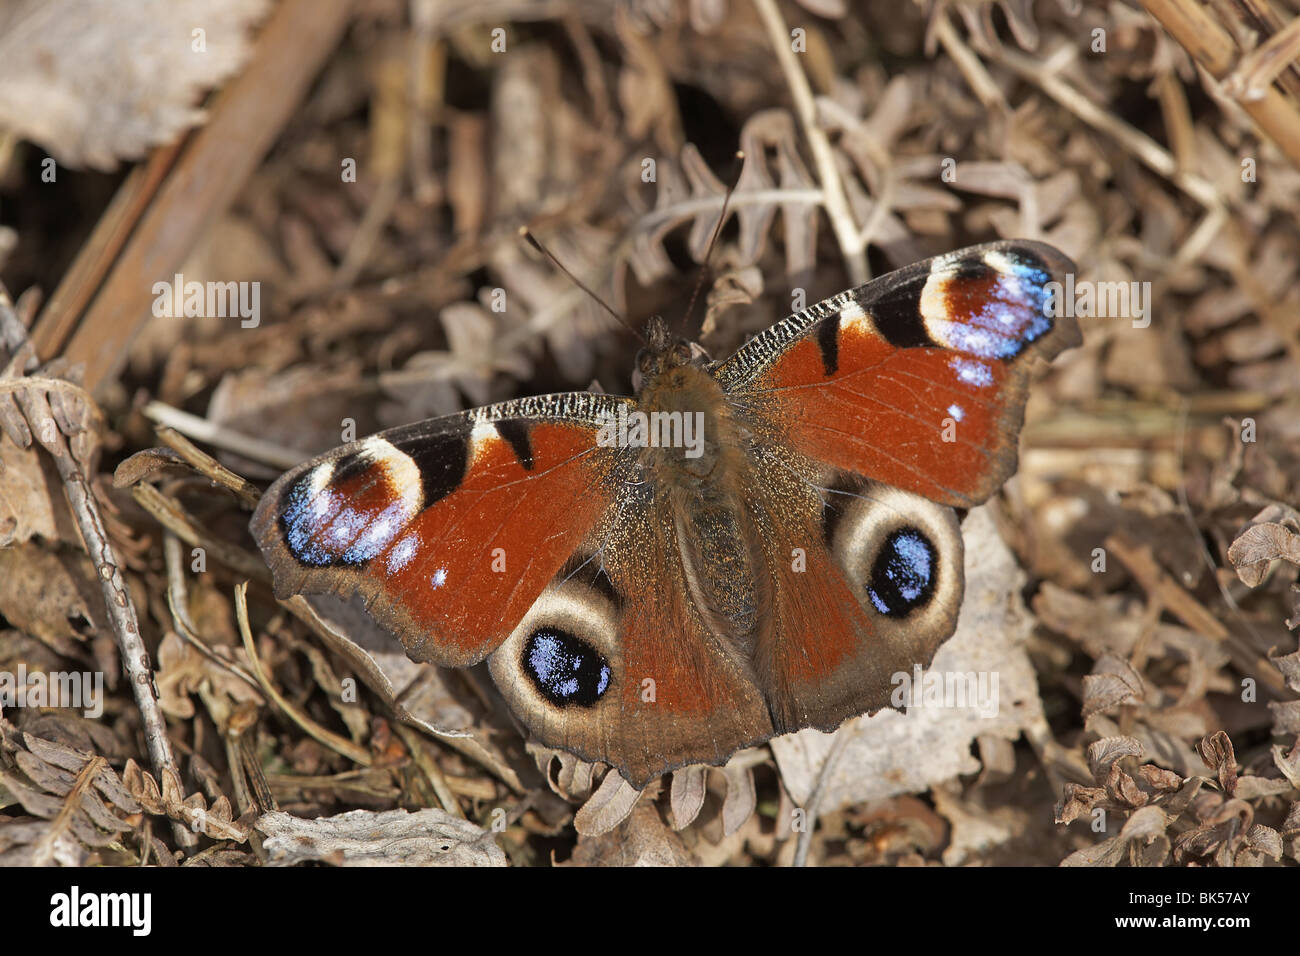 Peacock, Inachis io, butterfly Stock Photo